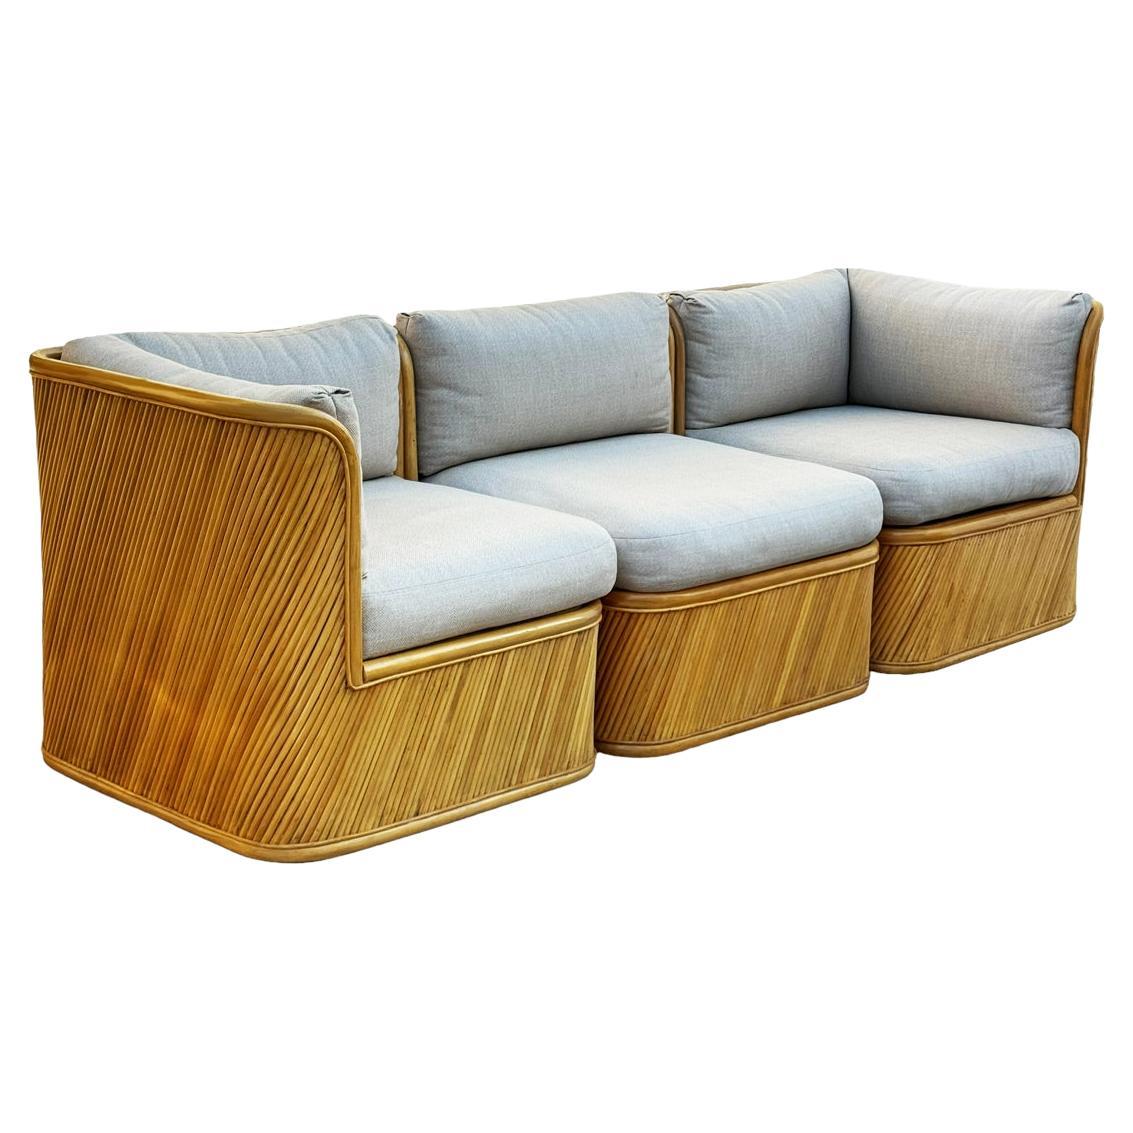 Mid-Century Modern Bamboo Pencil Reed Modular or Sectional Sofa with New Cushion